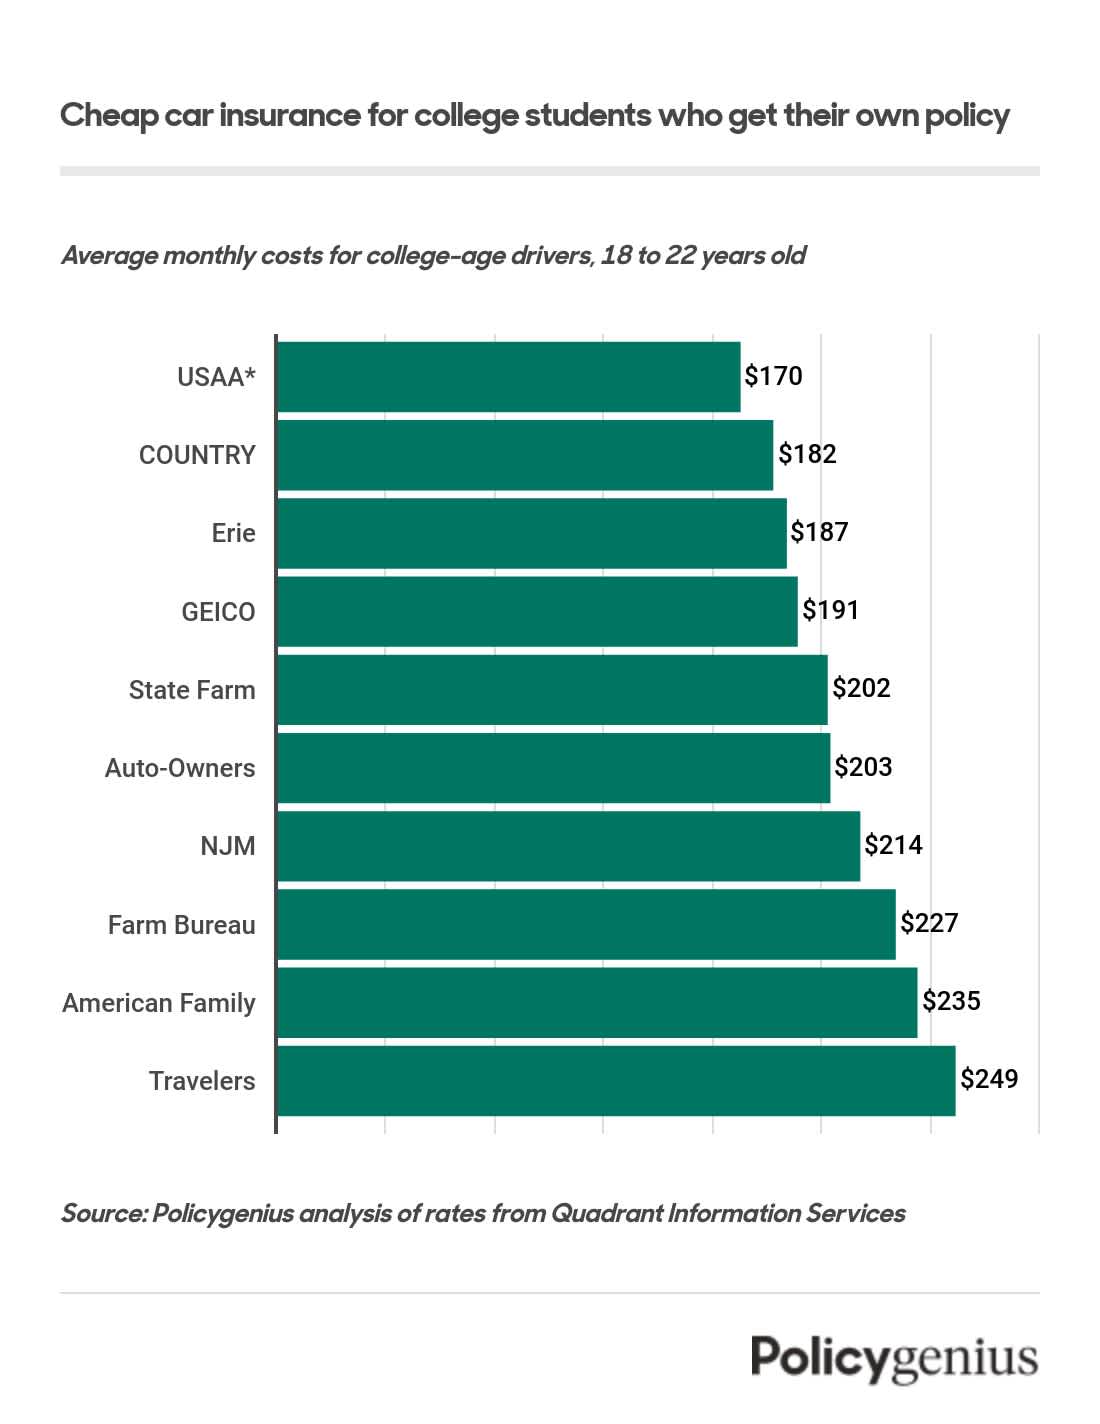 Bar graph showing the cost of car insurance for college students who get their own insurance.